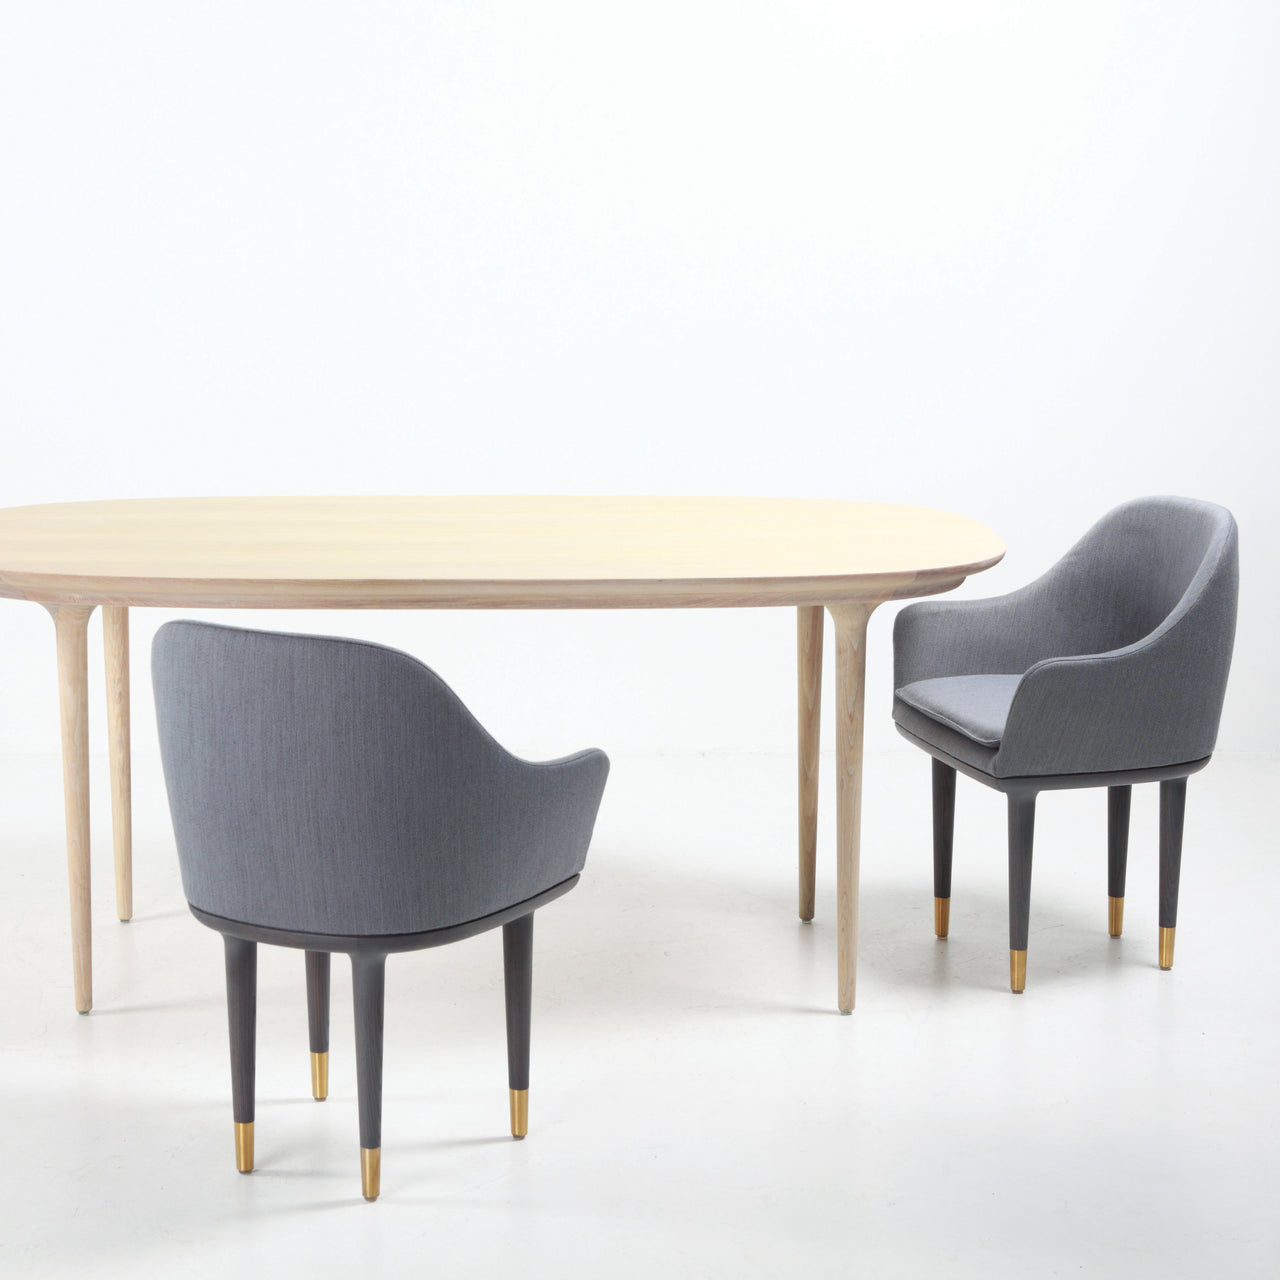 Lunar Dining Chair: Small